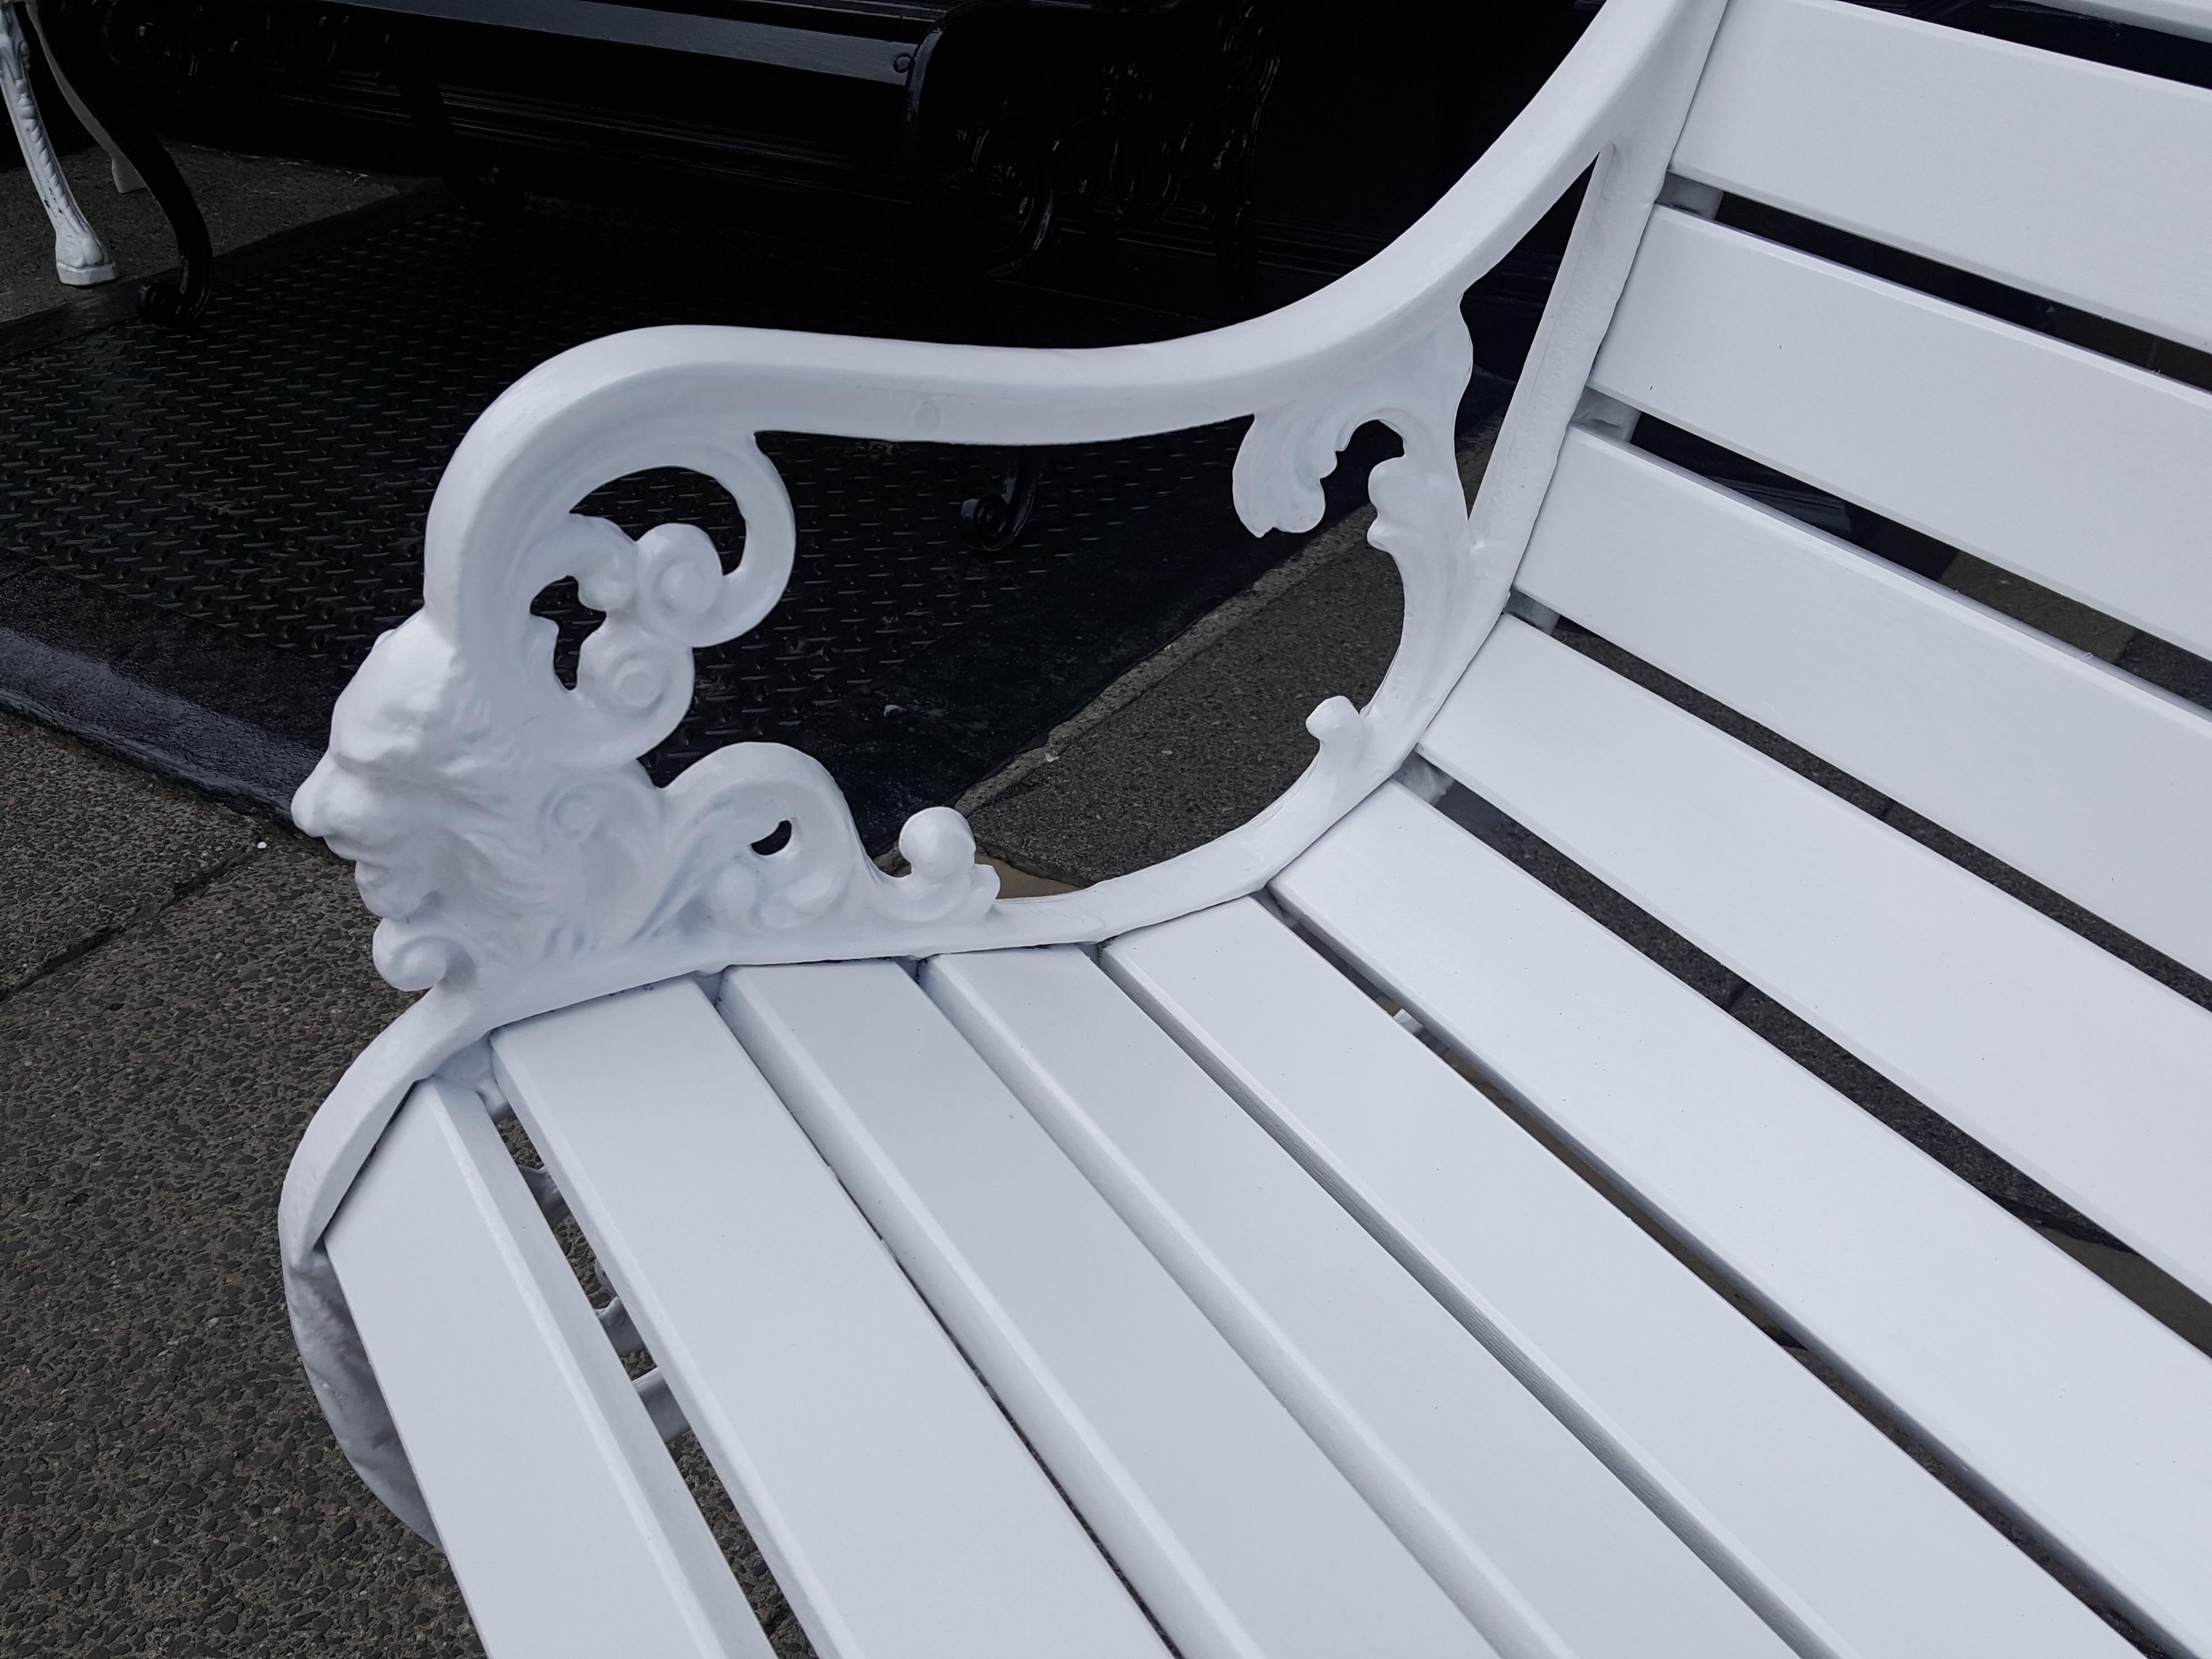 Aluminium garden bench with lion head arm rests, fully restored with primed and painted redwood slats, measures: 46